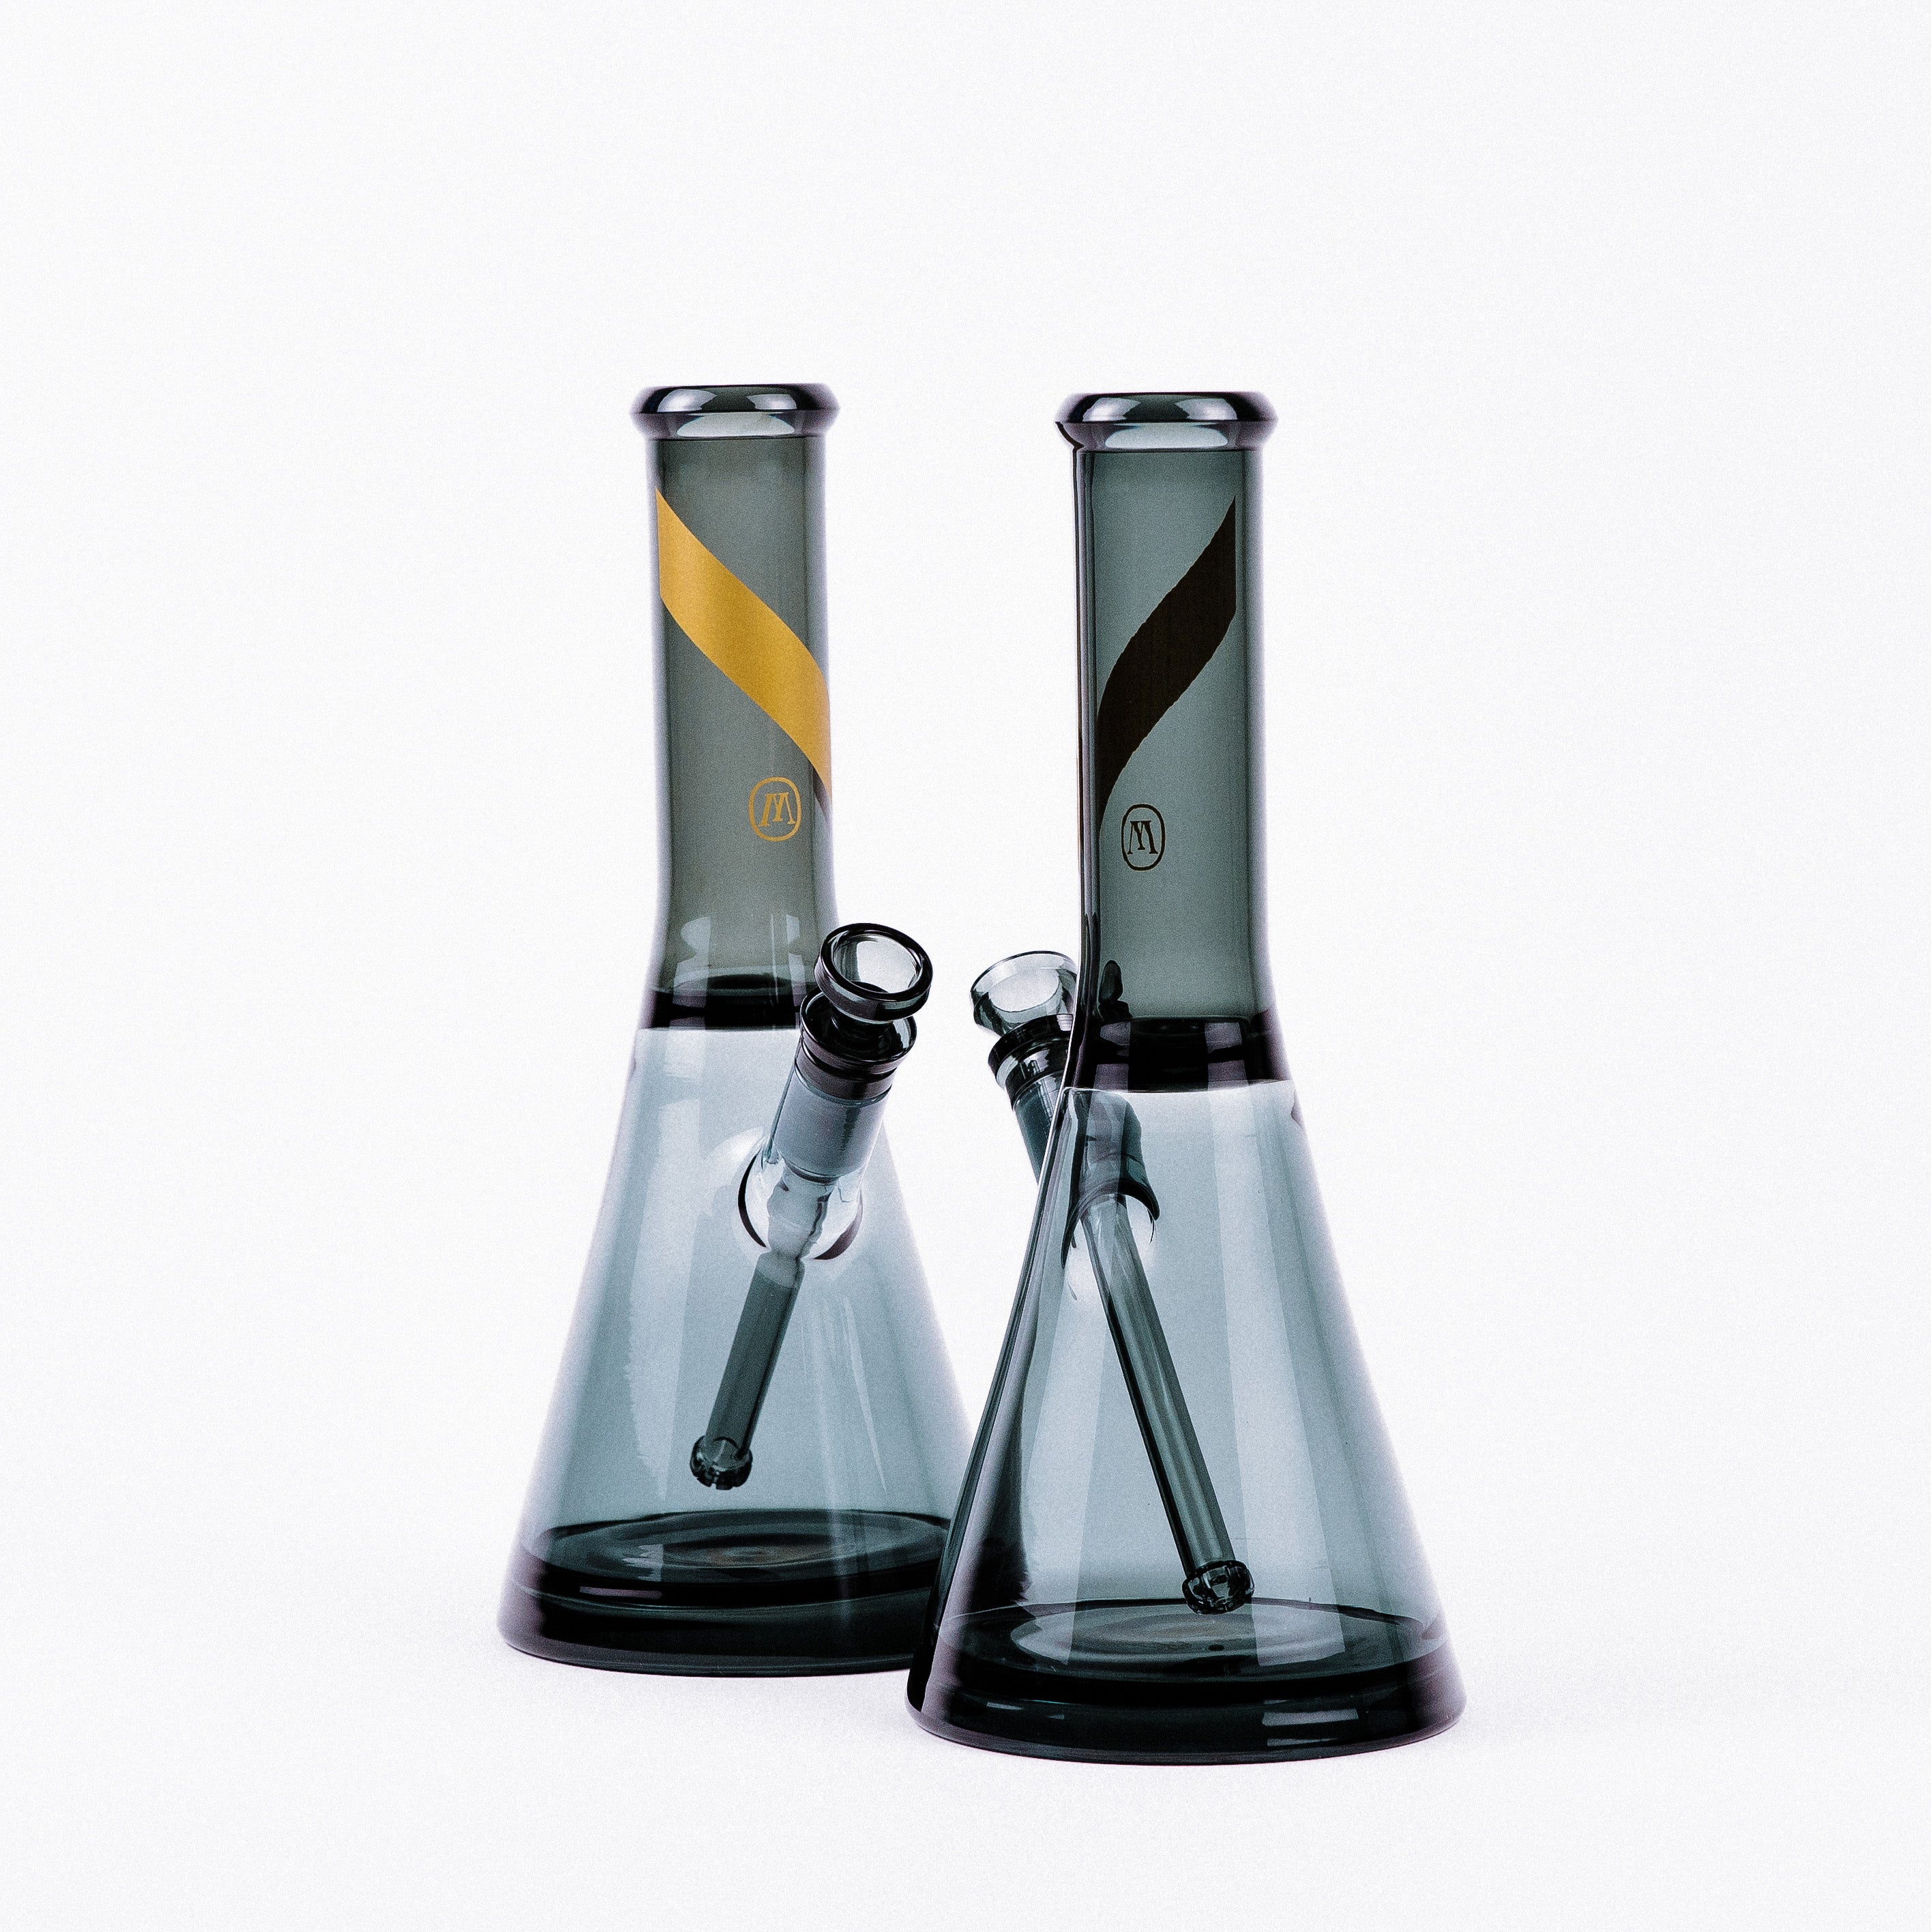 The 11 Best Bongs You Can Buy for Smoking Weed